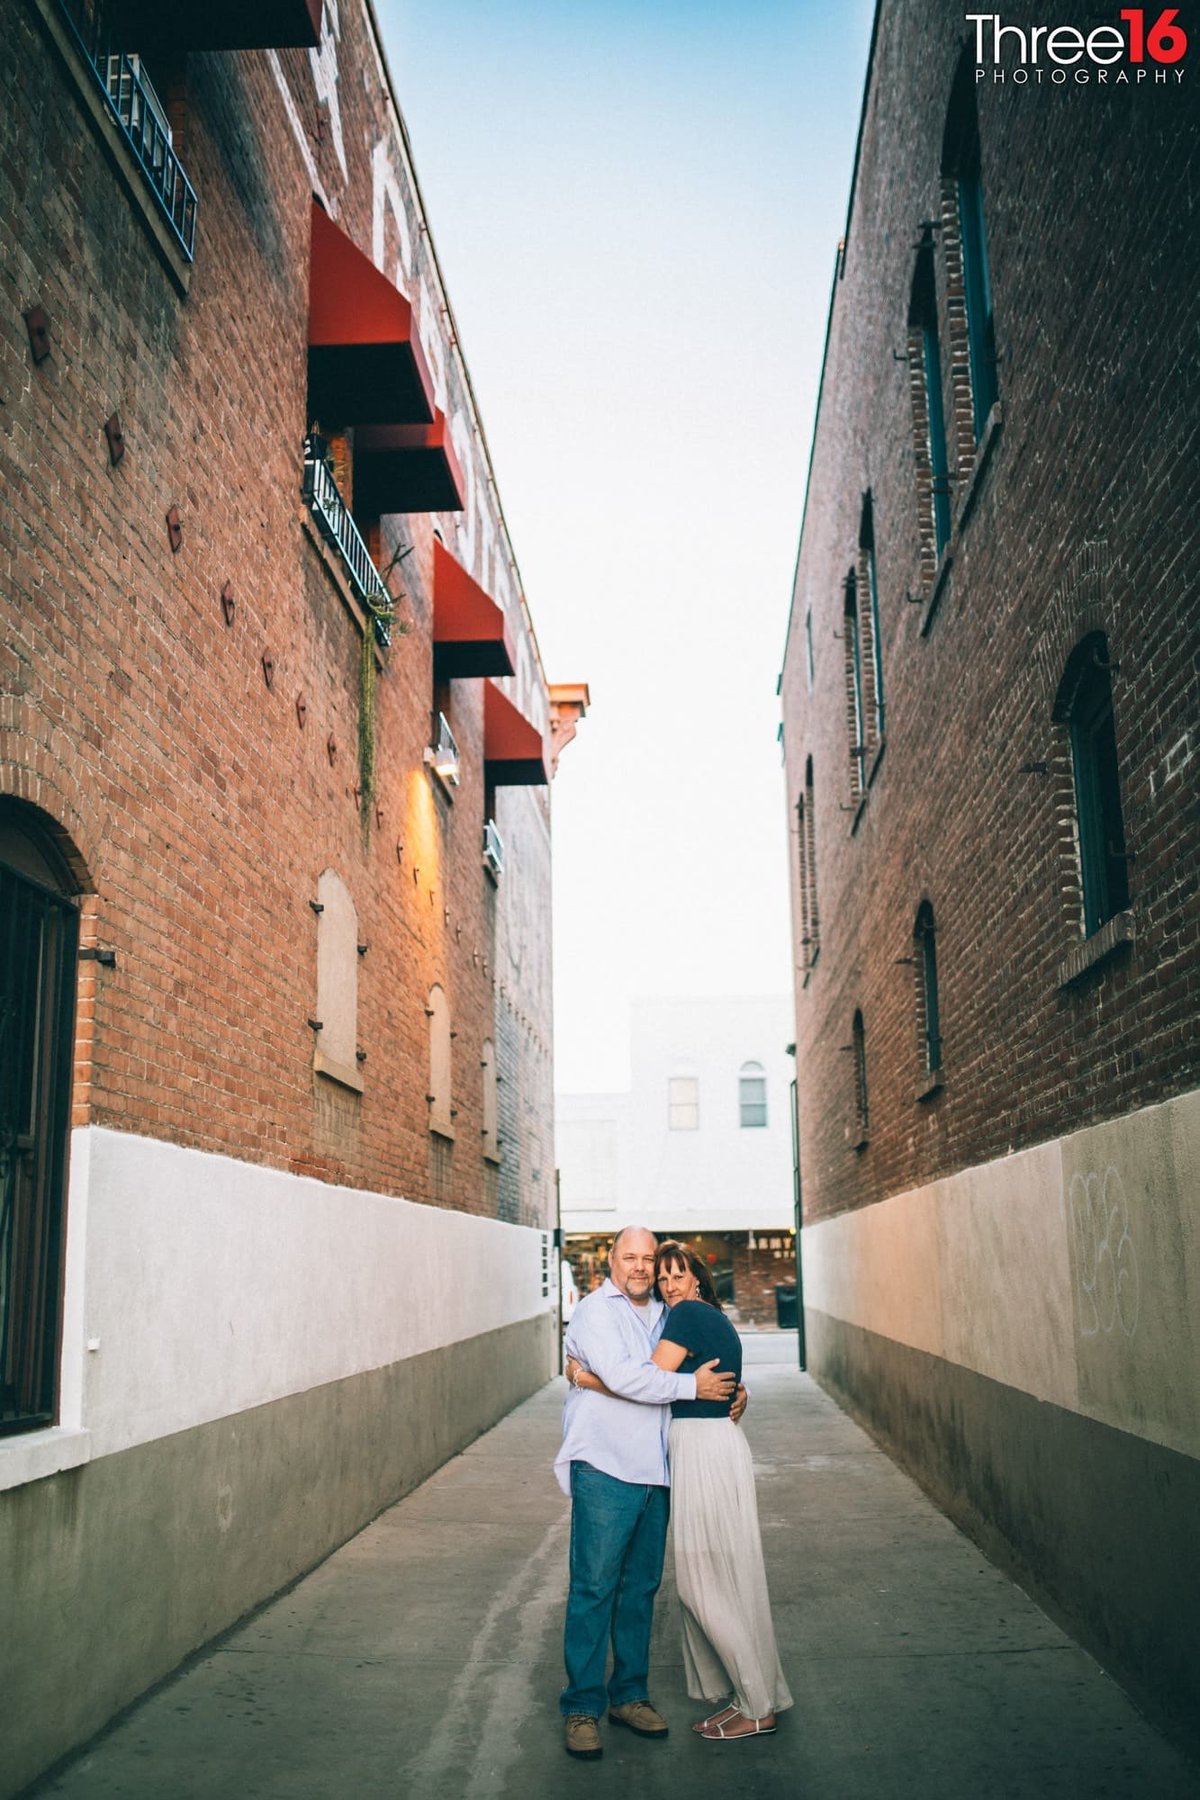 Engaged couple embrace one another in an Old Towne Orange alleyway